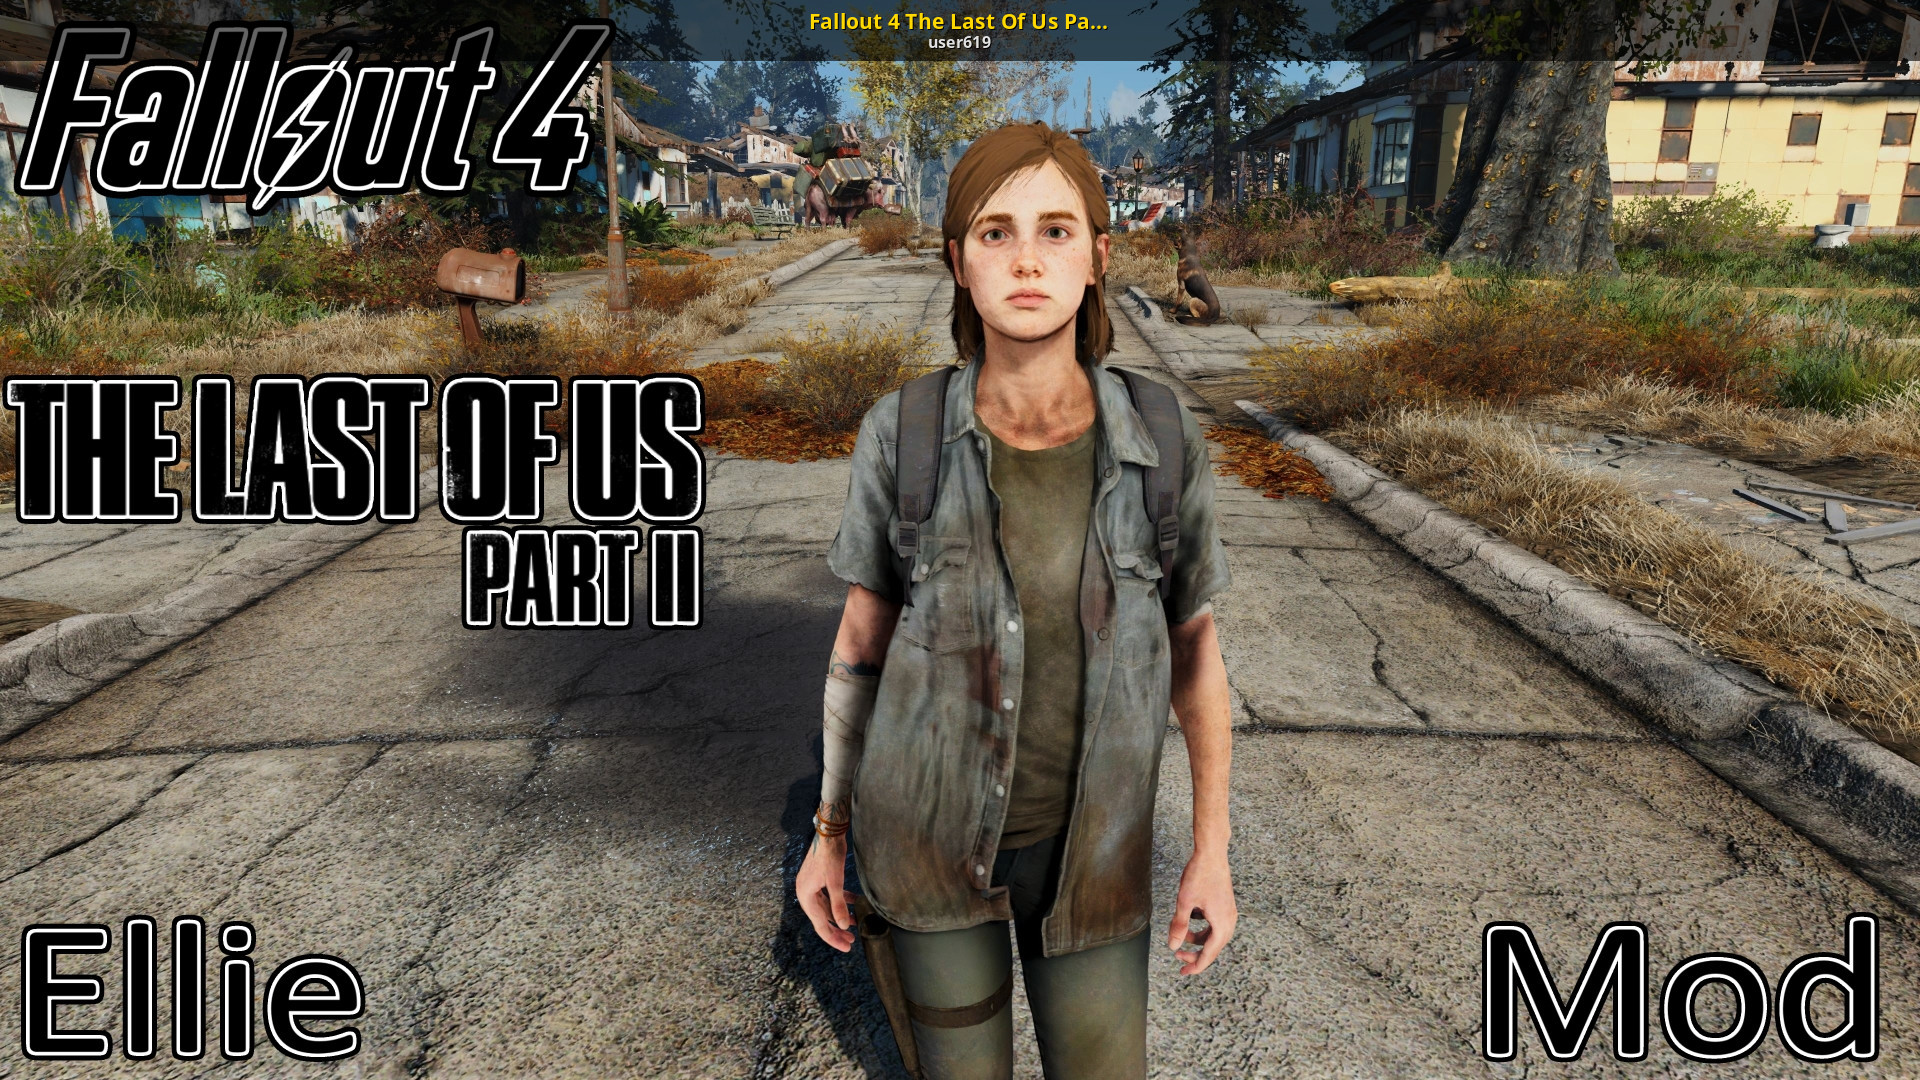 The last of us or fallout 4 фото 14